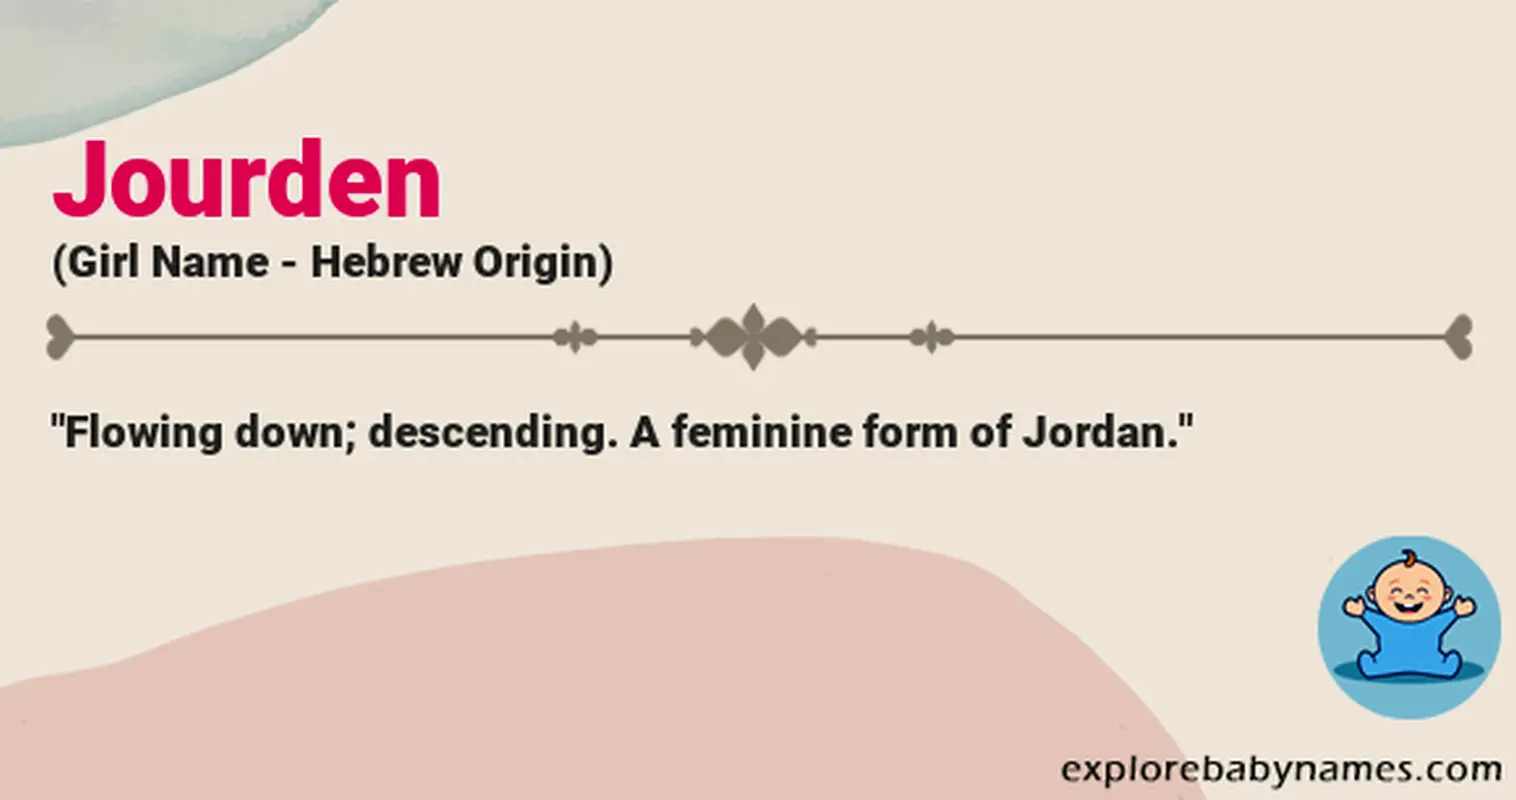 Meaning of Jourden